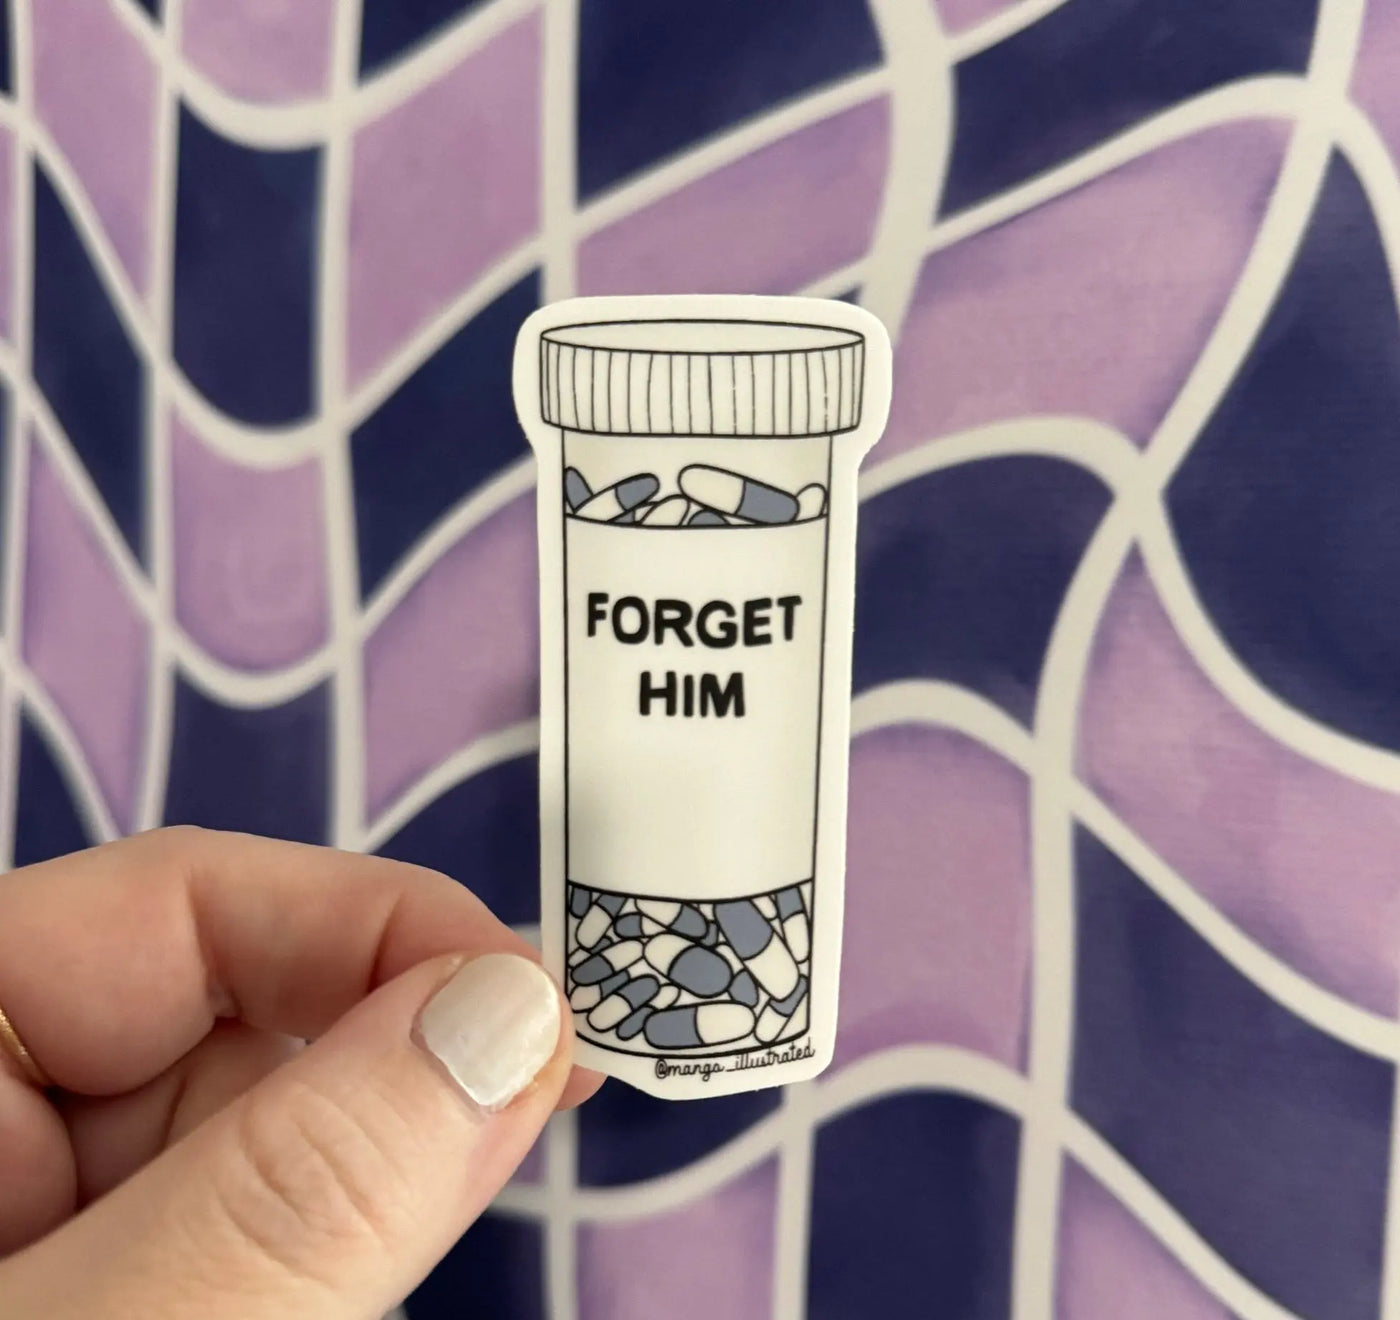 Forget Him pill sticker MangoIllustrated